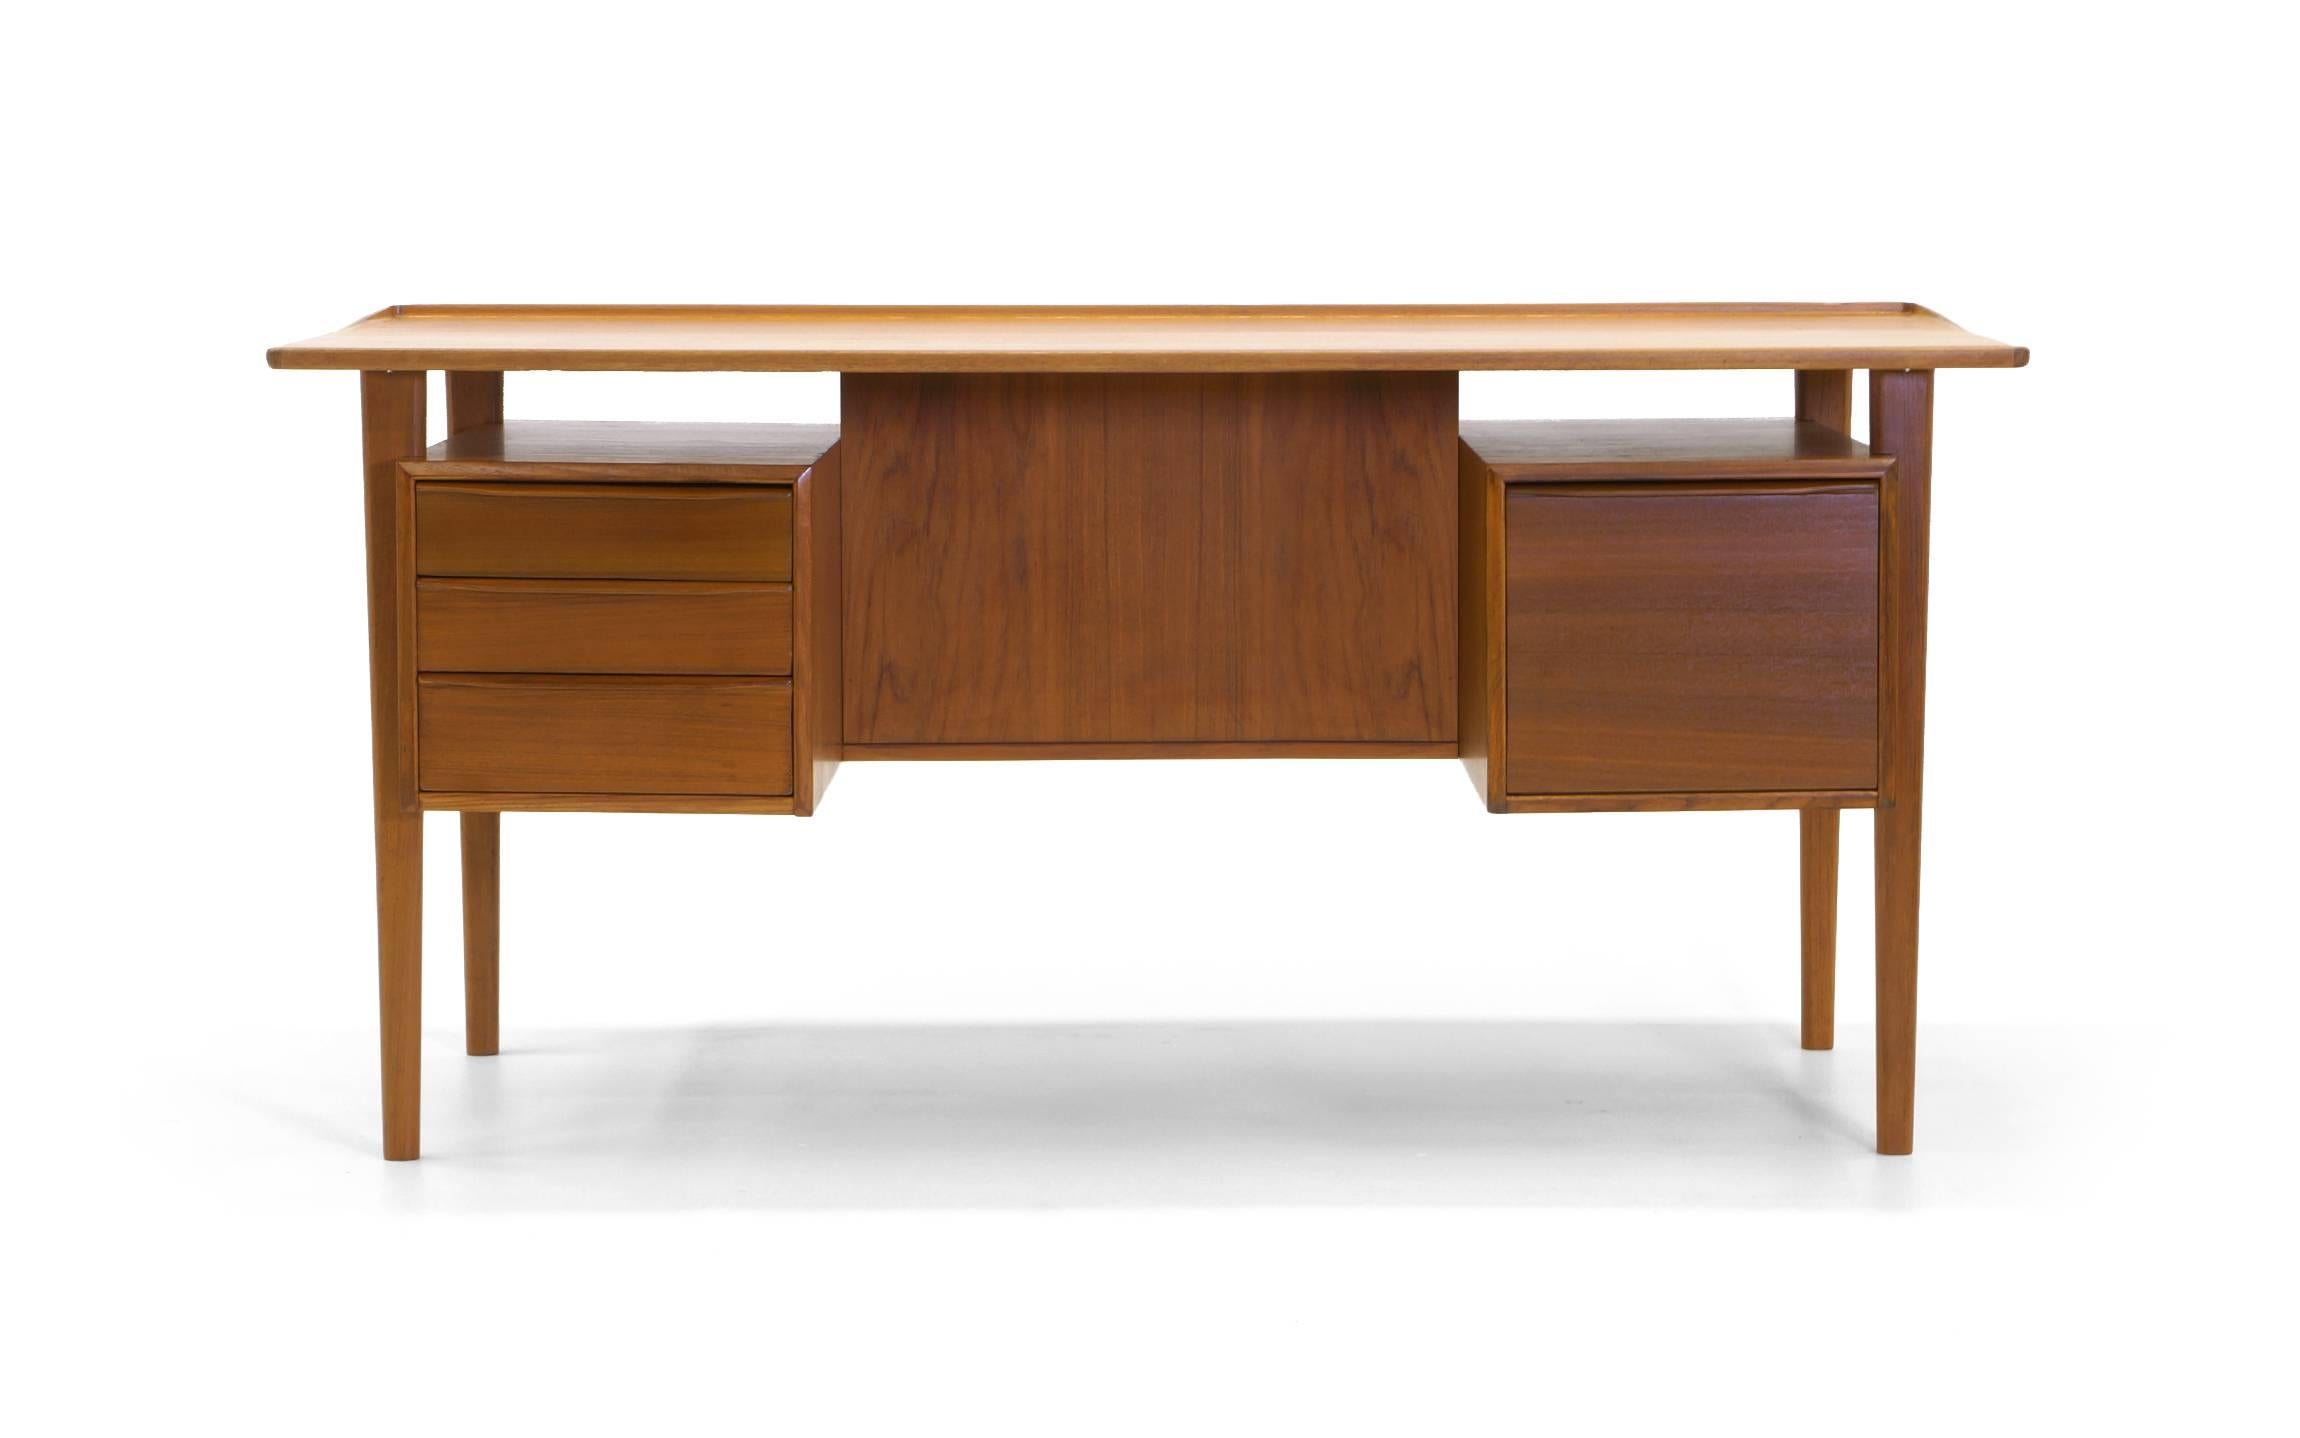 Teak desk by Peter Løvig Nielsen for Lovig. Expertly refinished Danish teak. Double pedestal drawers with storage. A beautiful mid-sized desk for home or office.